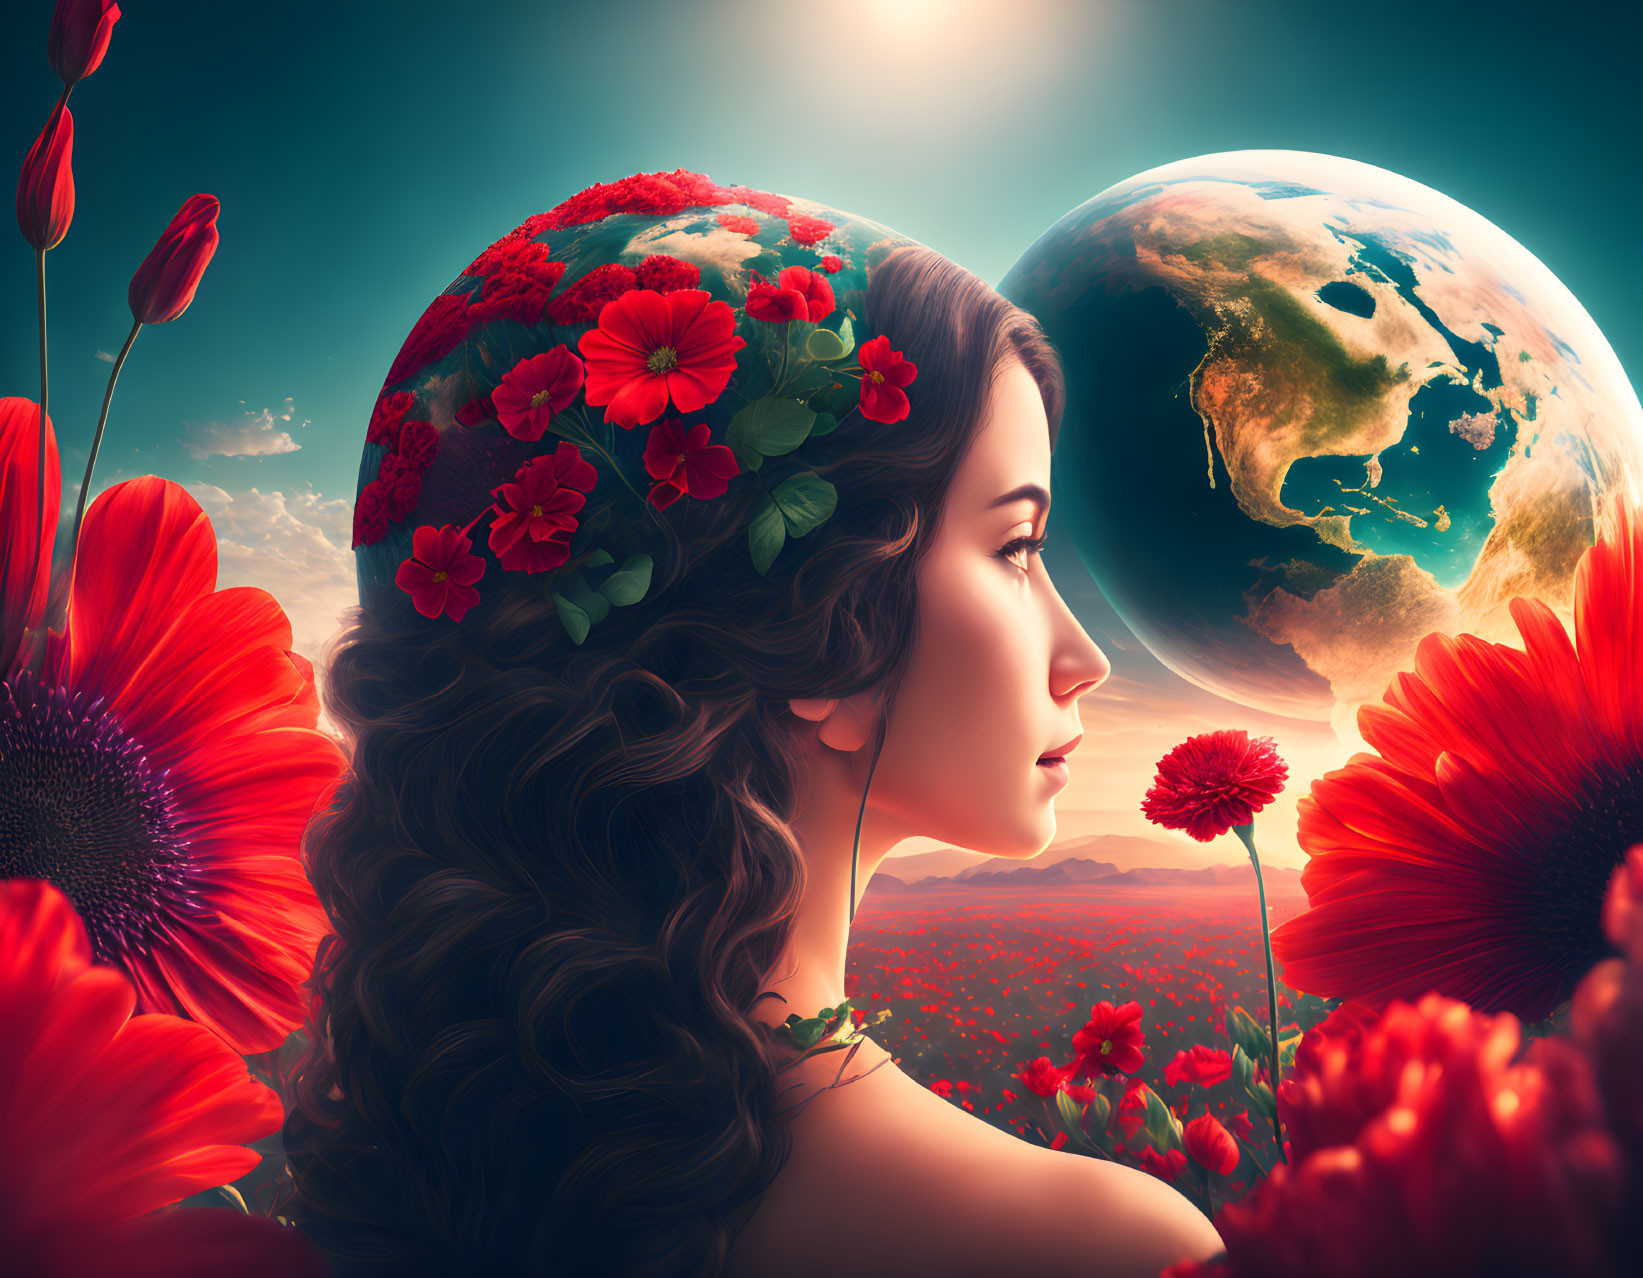 Woman with floral headband admires Earth among red poppies in surreal sky